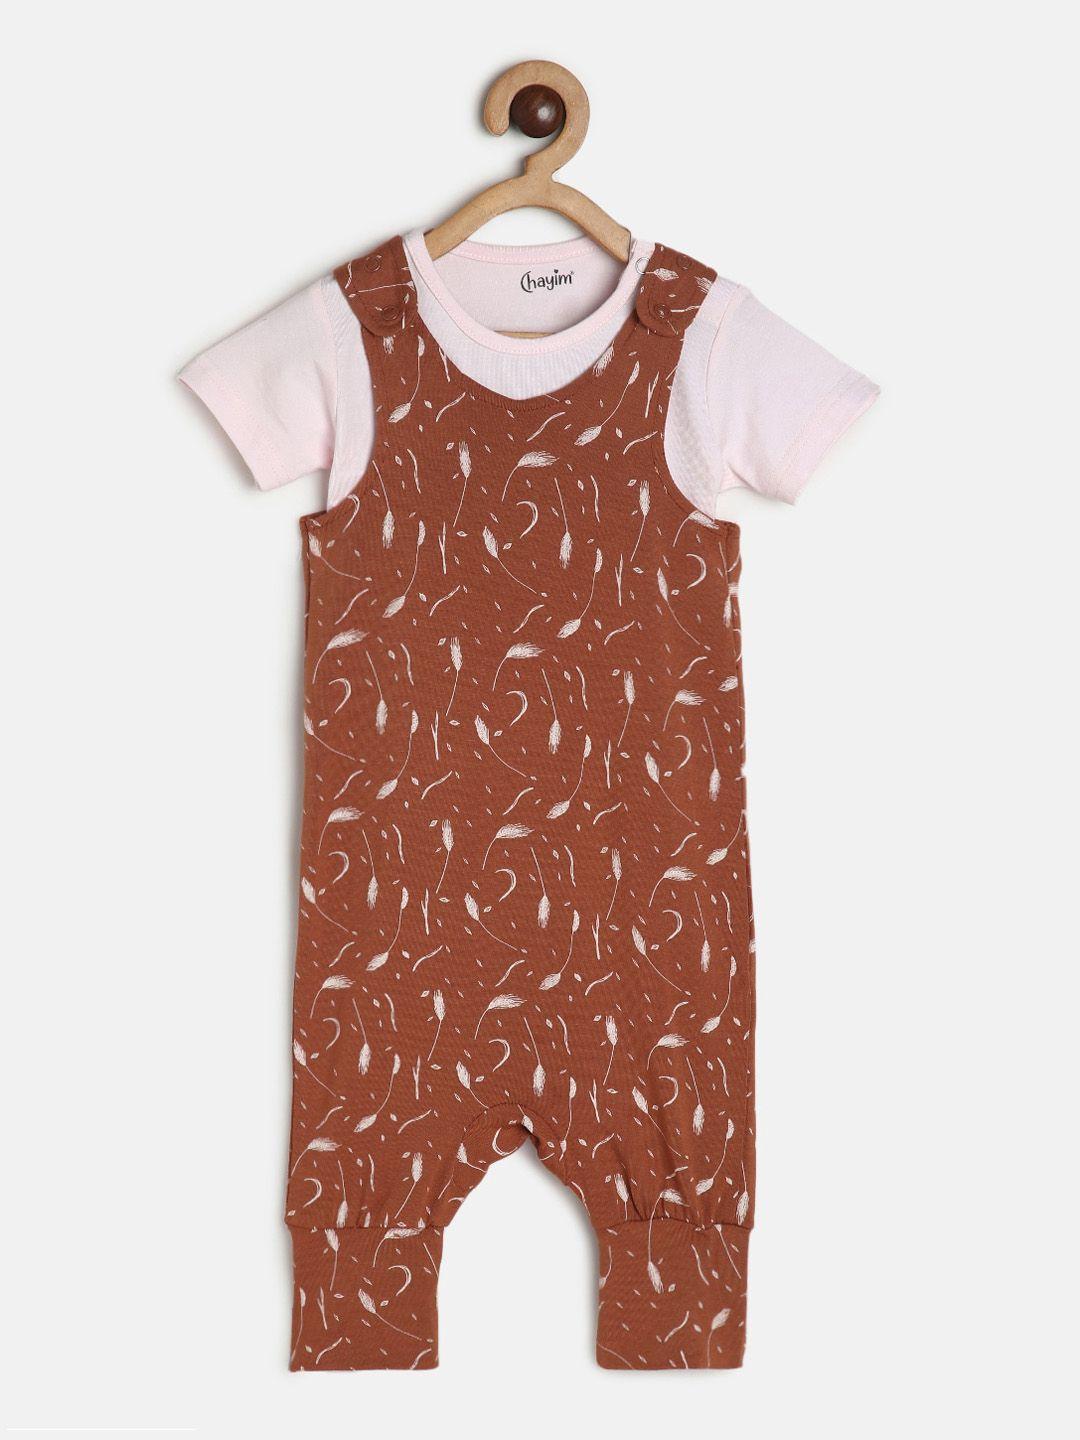 chayim infants abstract printed cotton dungaree with t-shirt